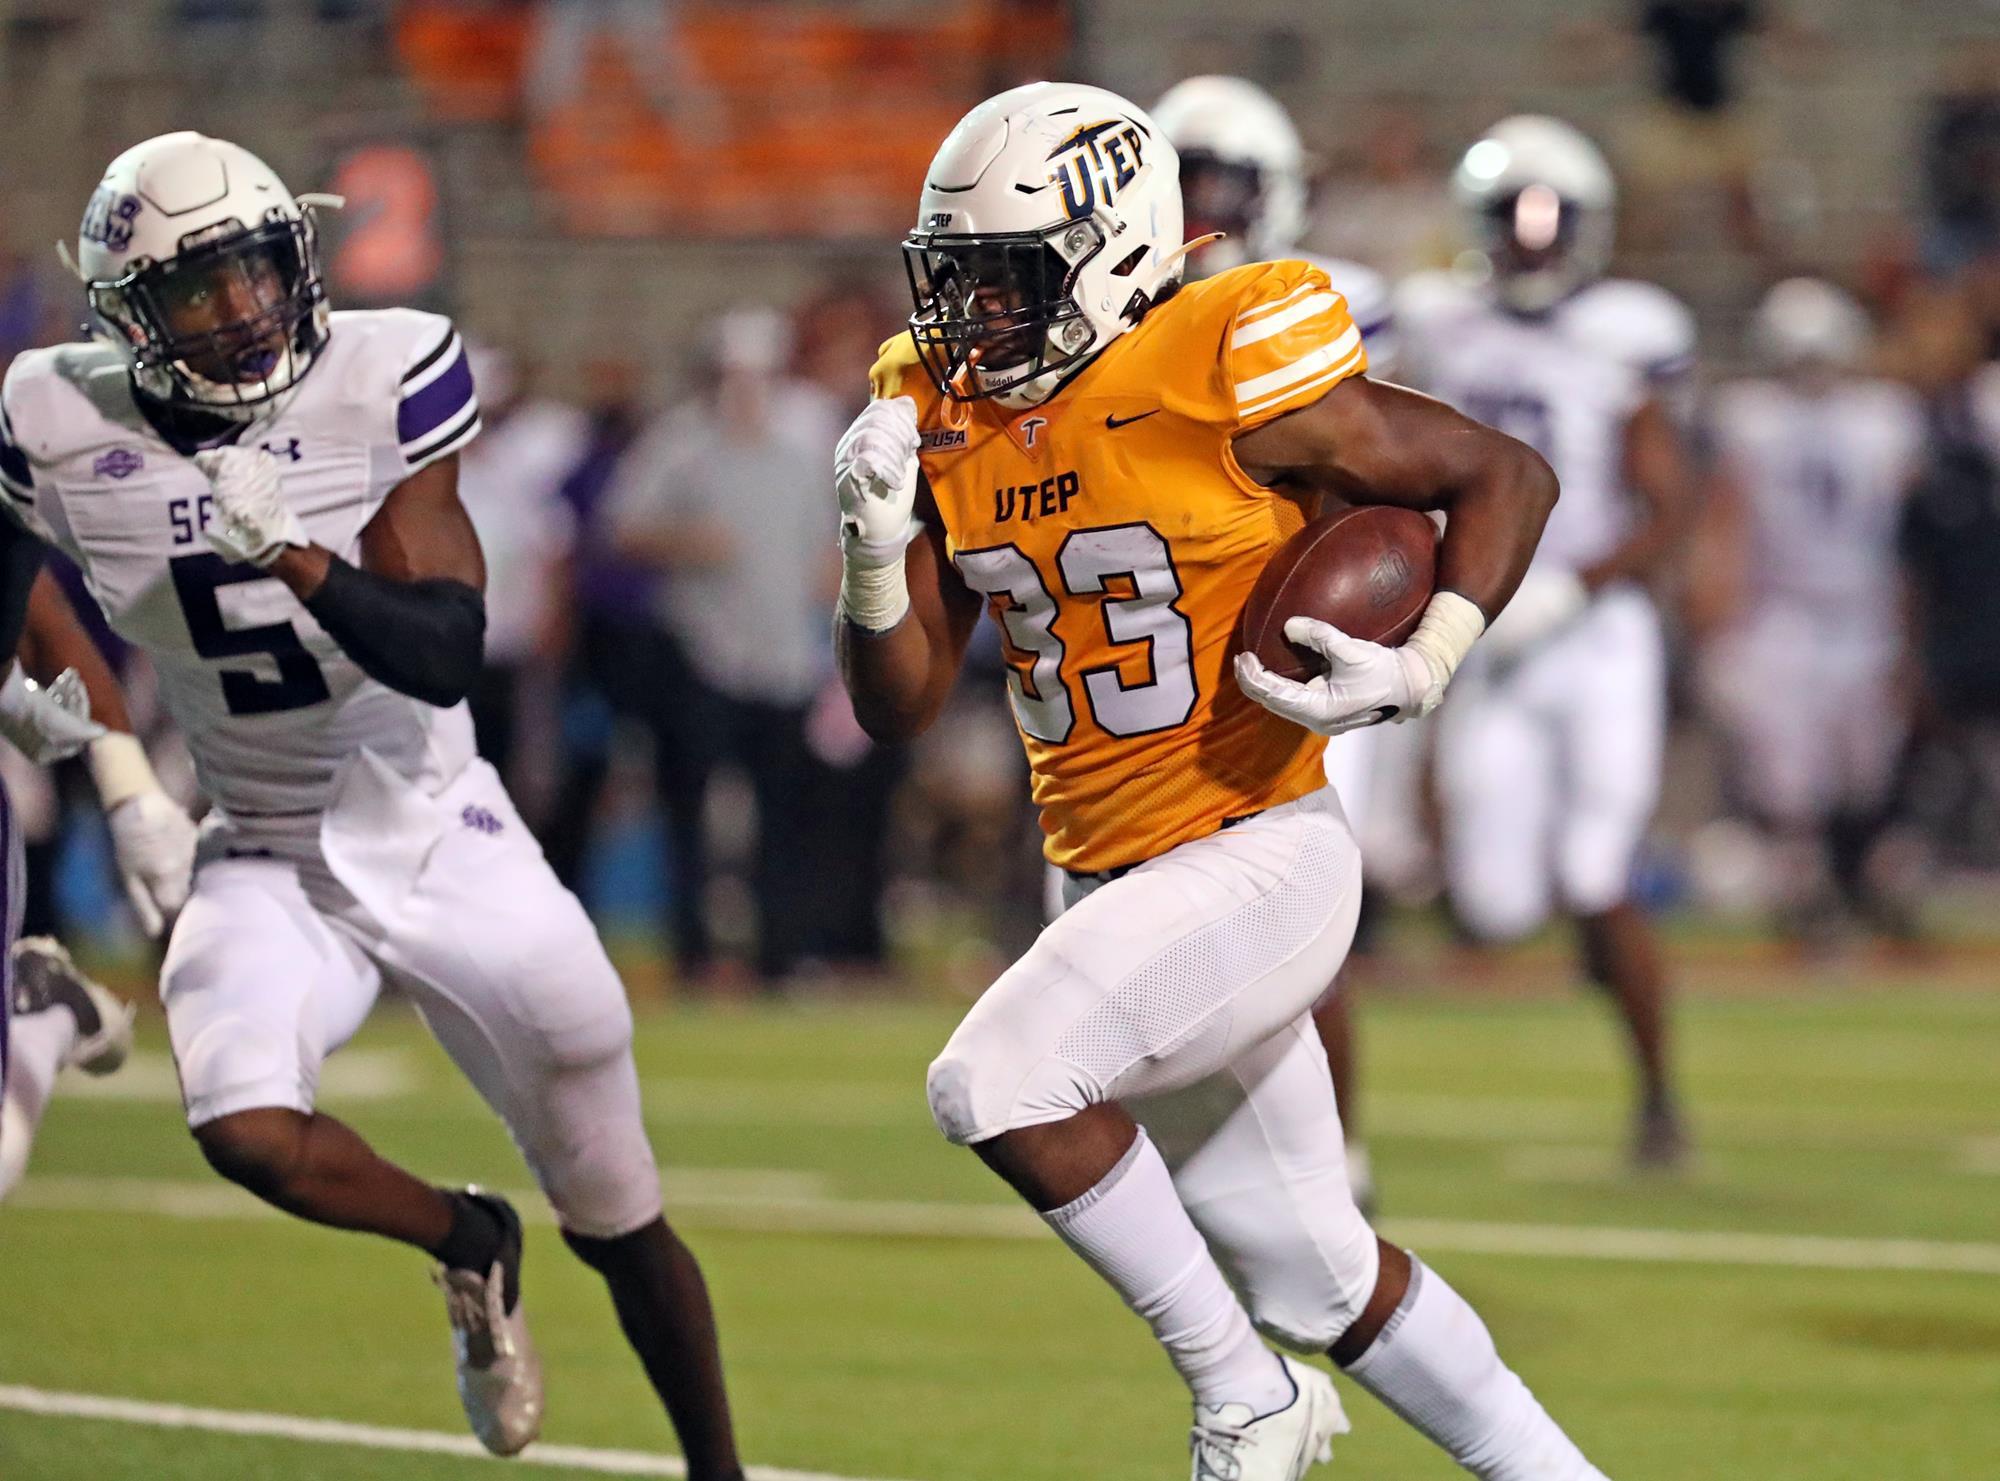 Deion Hankins is a bruising RB for UTEP who's hard to bring down. Hula Bowl scout PJ Hardaway breaks down Hankins as an NFL Prospect in his report.